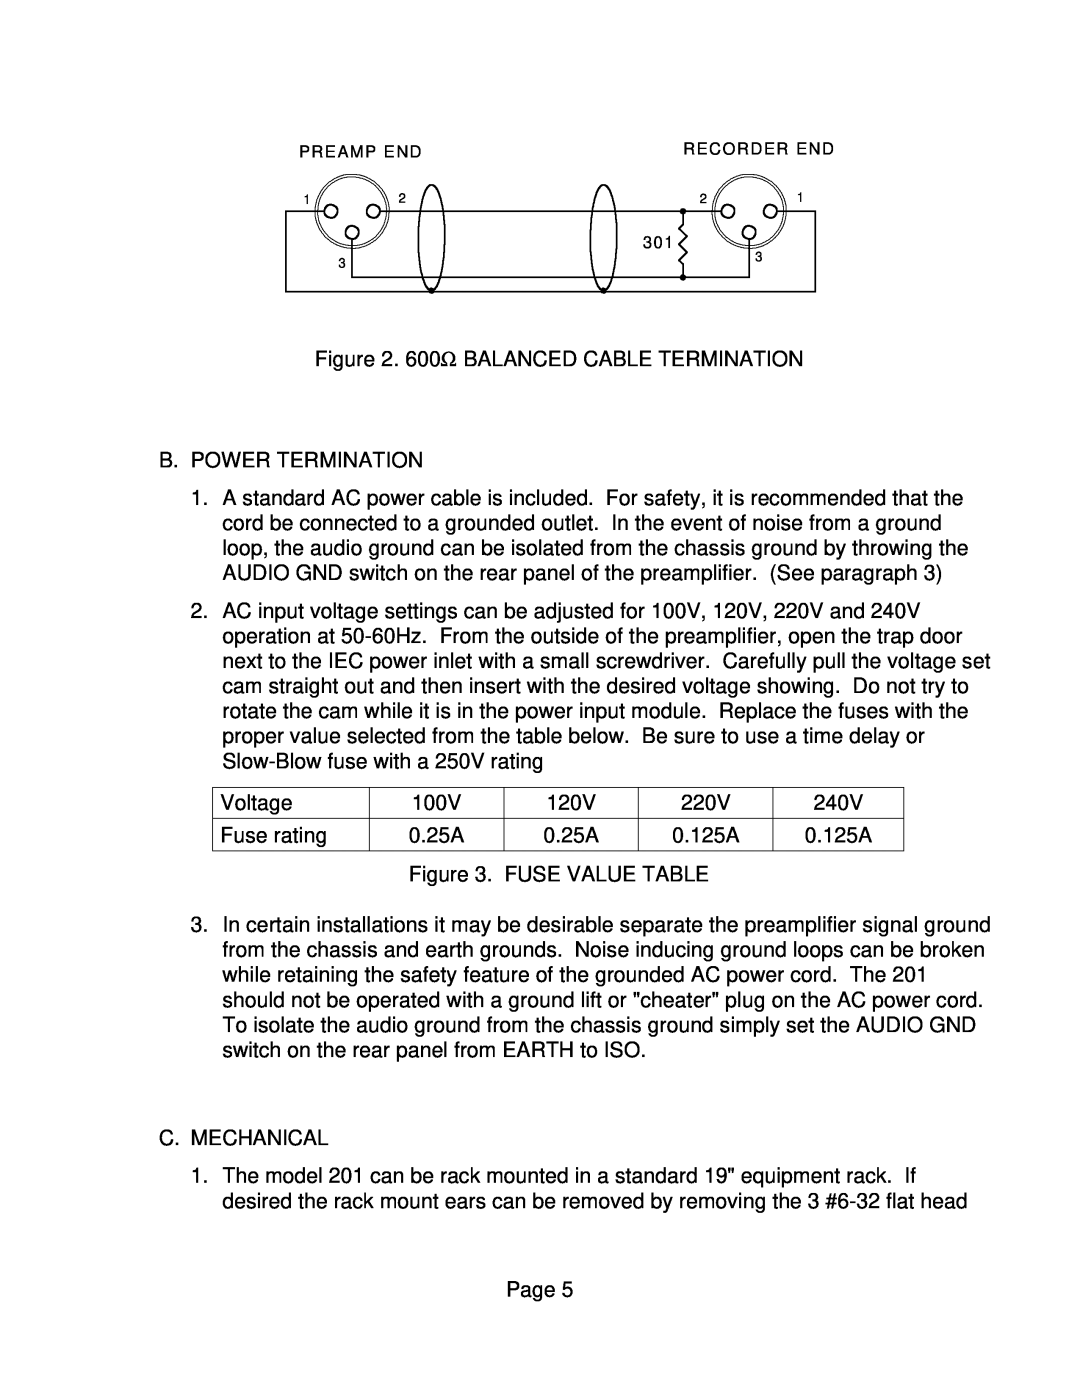 Microplane 201 owner manual 600Ω BALANCED CABLE TERMINATION 